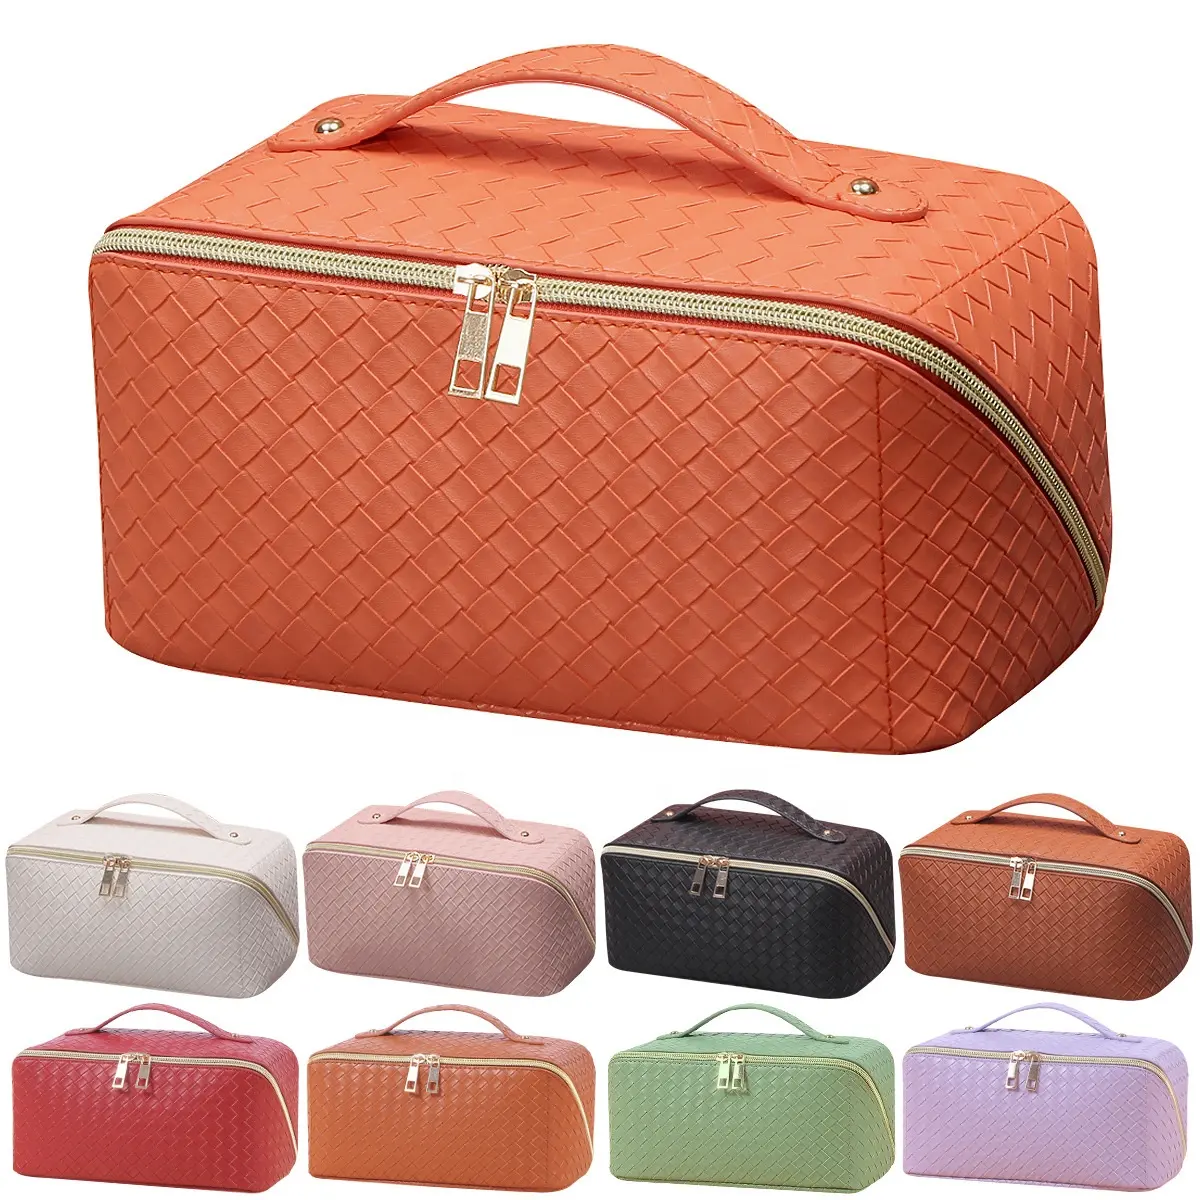 Large Capacity Weave Cosmetic Bag Makeup Organizer Bag with Compartment Waterproof PU Leather Travel Toiletry Bag for Women